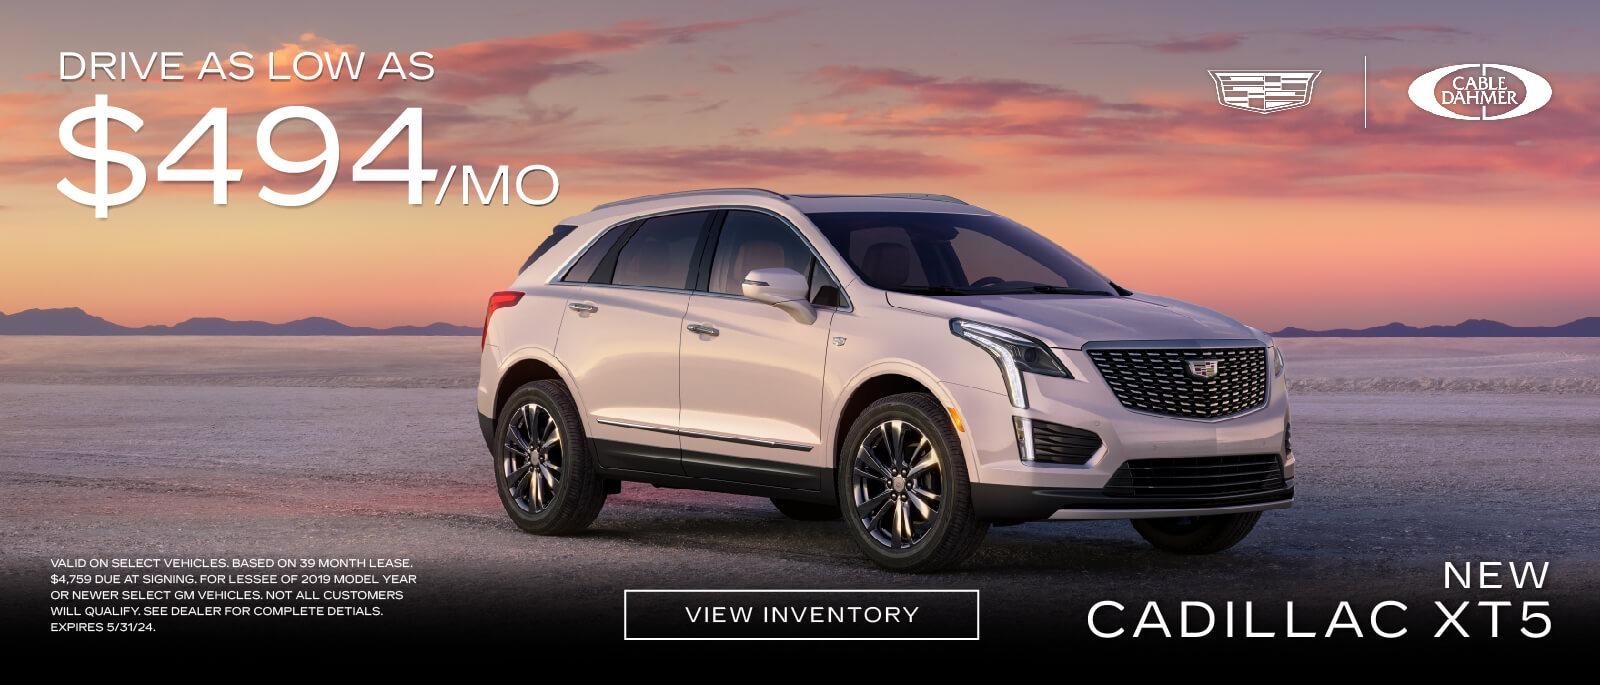 New Cadillac XT5 drive as low as $494 a month